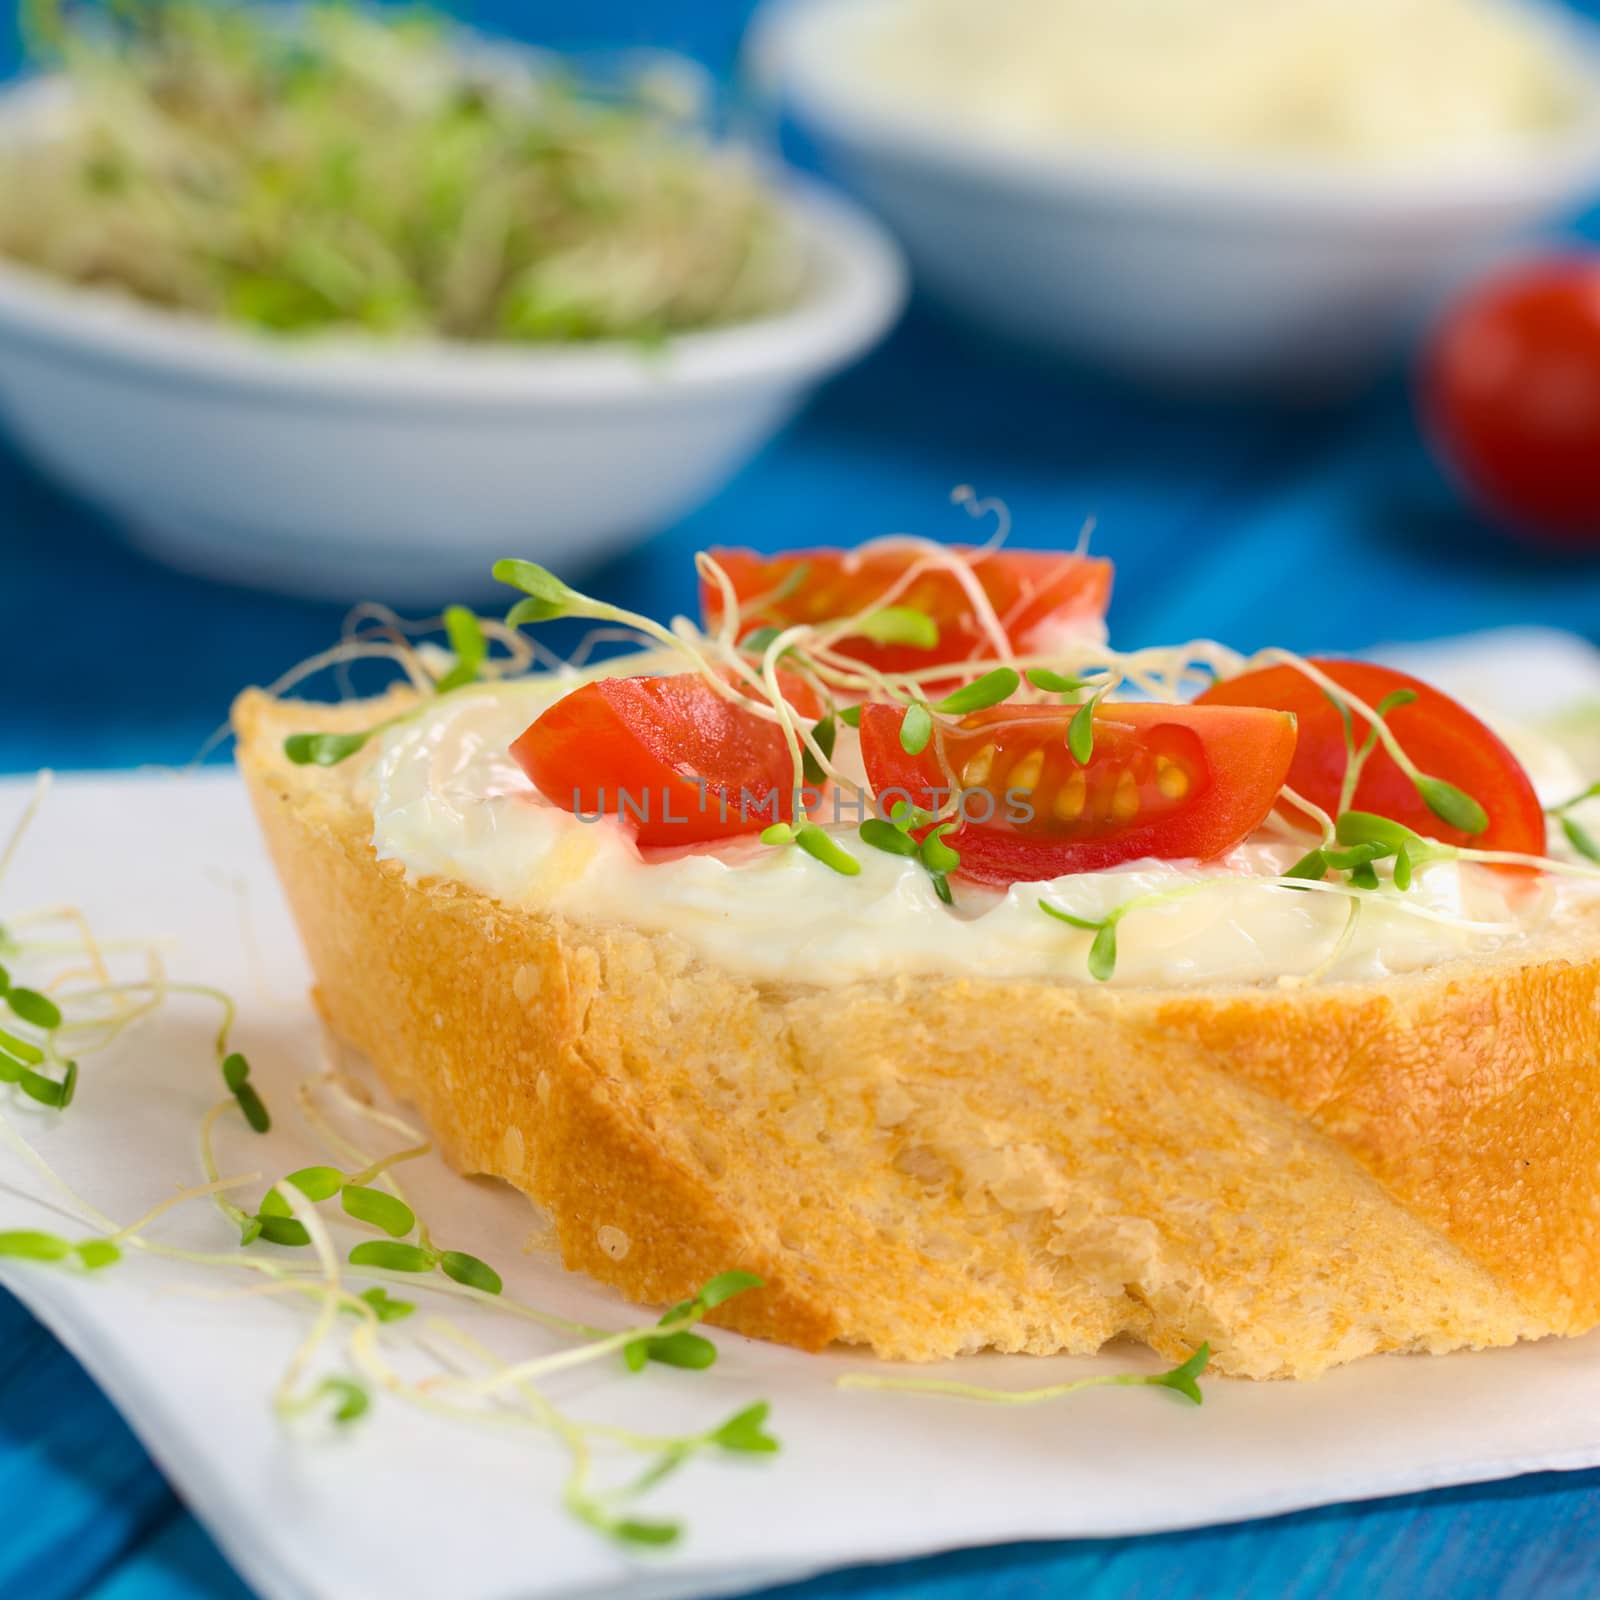 Baguette slice spread with cream cheese, with cherry tomato and alfalfa sprouts on top served on sandwich paper (Selective Focus, Focus on the front of the first tomato pieces)  